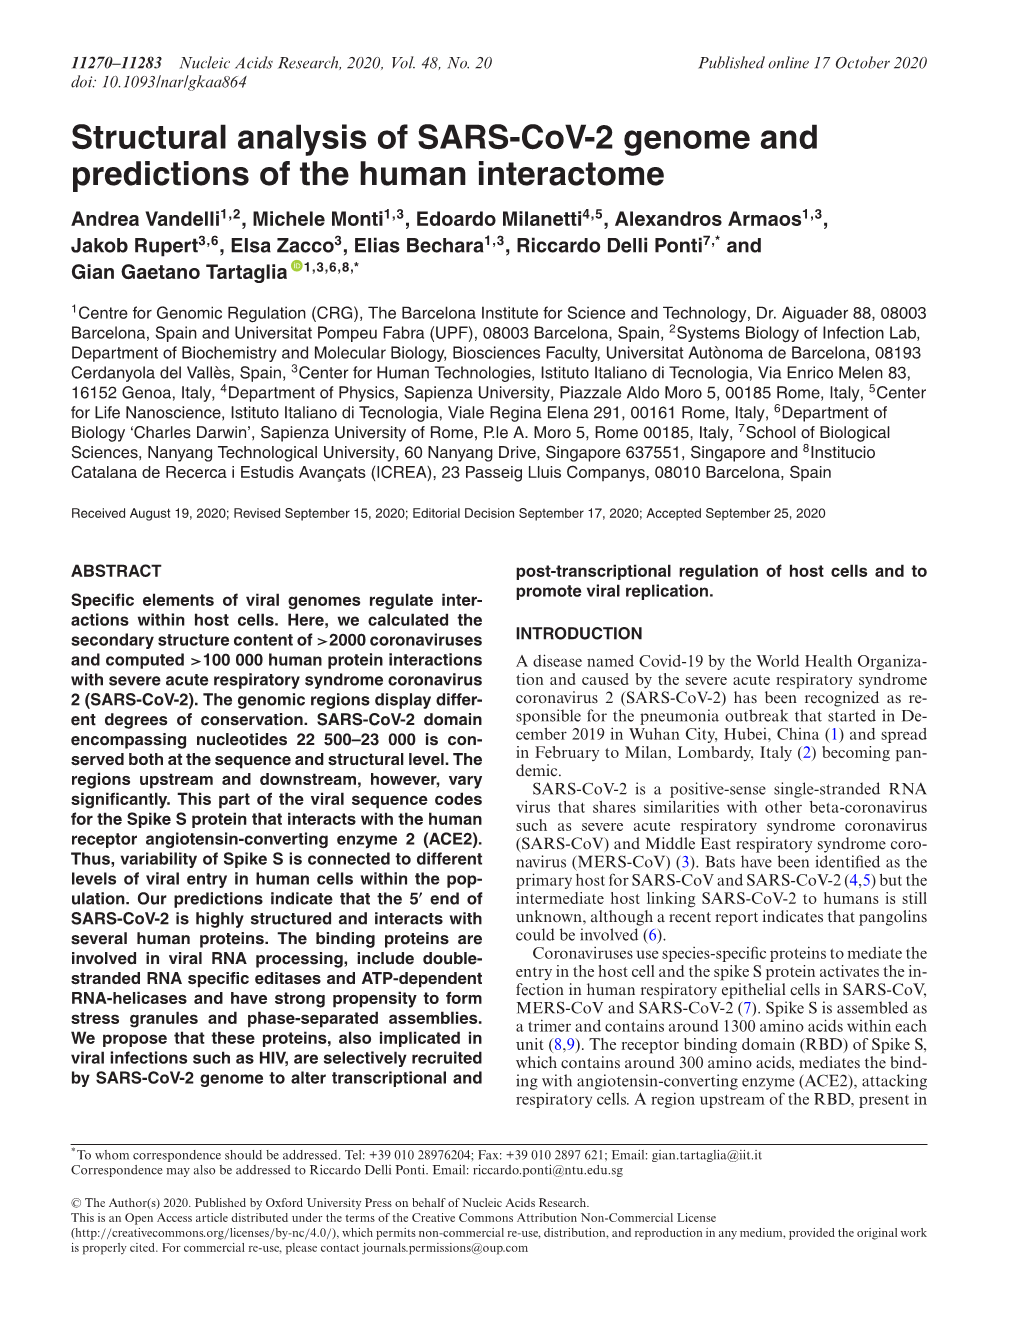 Structural Analysis of SARS-Cov-2 Genome and Predictions of the Human Interactome